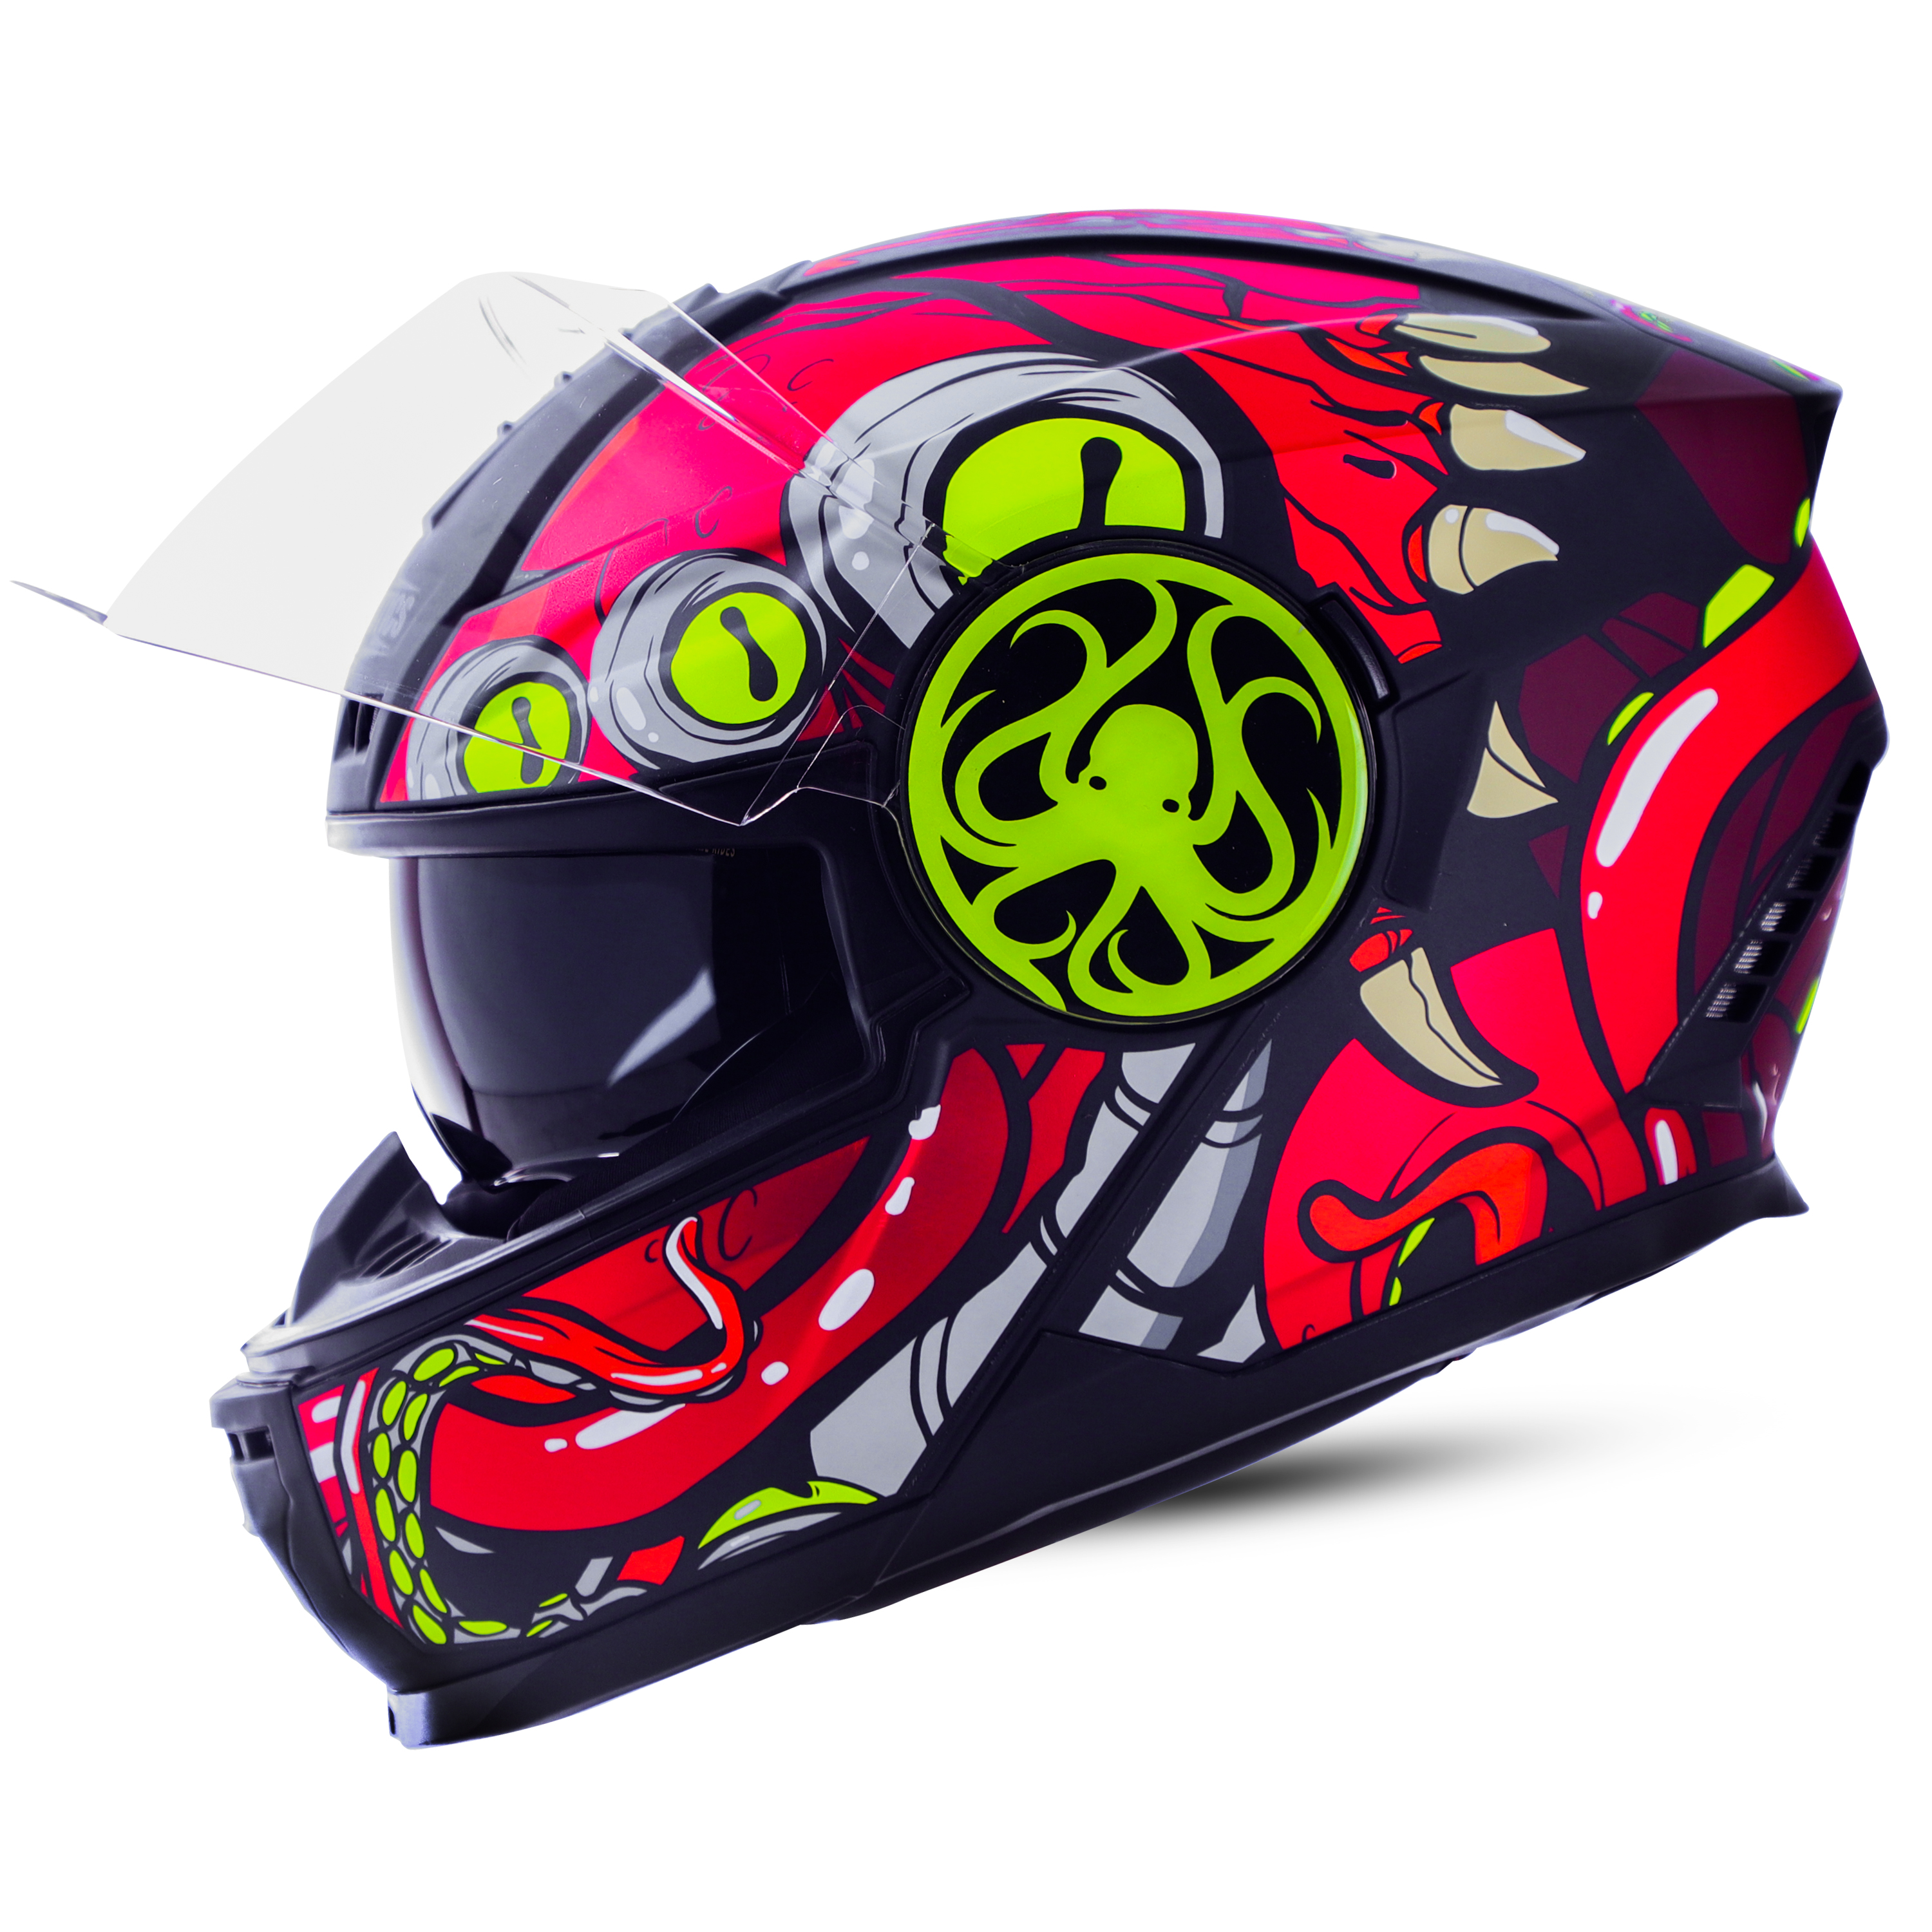 Steelbird SBH-40 Octopus ISI Certified Full Face Graphic Helmet For Men And Women With Inner Smoke Sun Shield (Glossy Black Chrome Red)